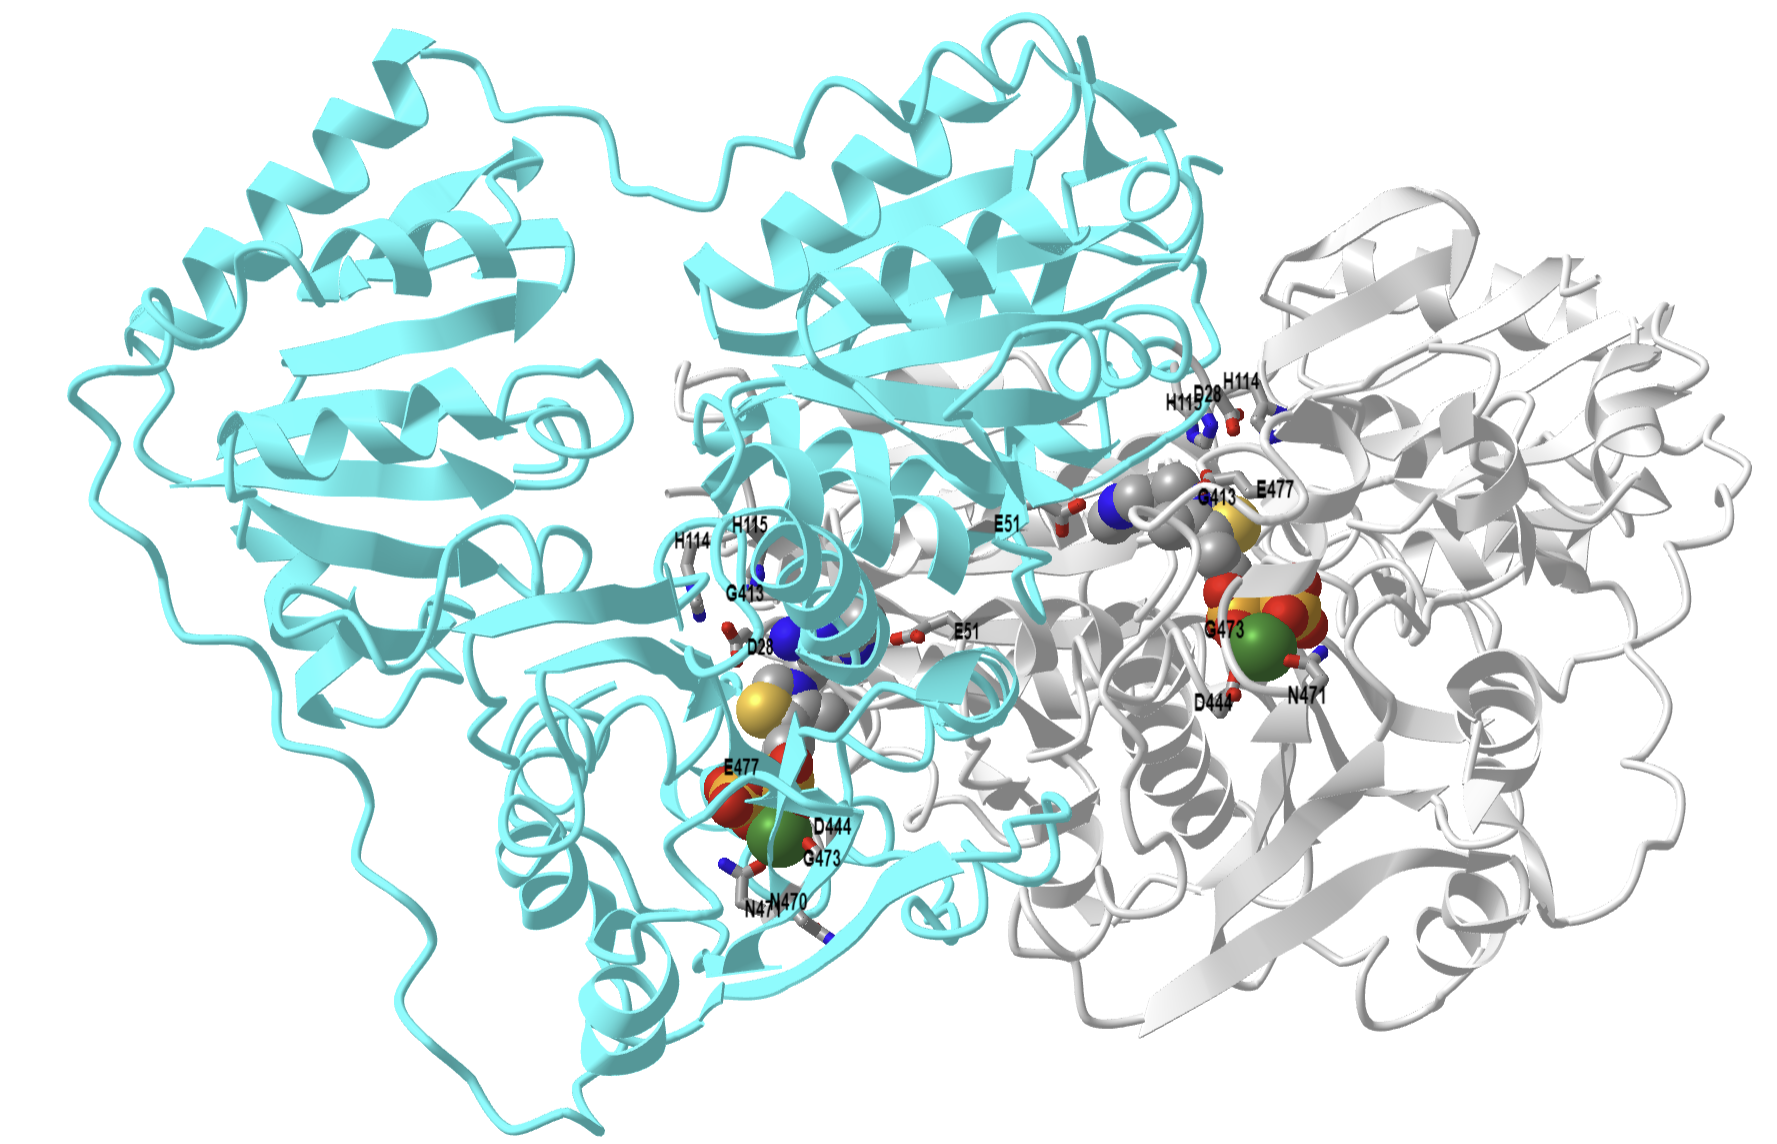 thiamin diphosphate-dependent enzyme pyruvate decarboxylase from the yeast Saccharomyces cerevisiae (1PVD).png